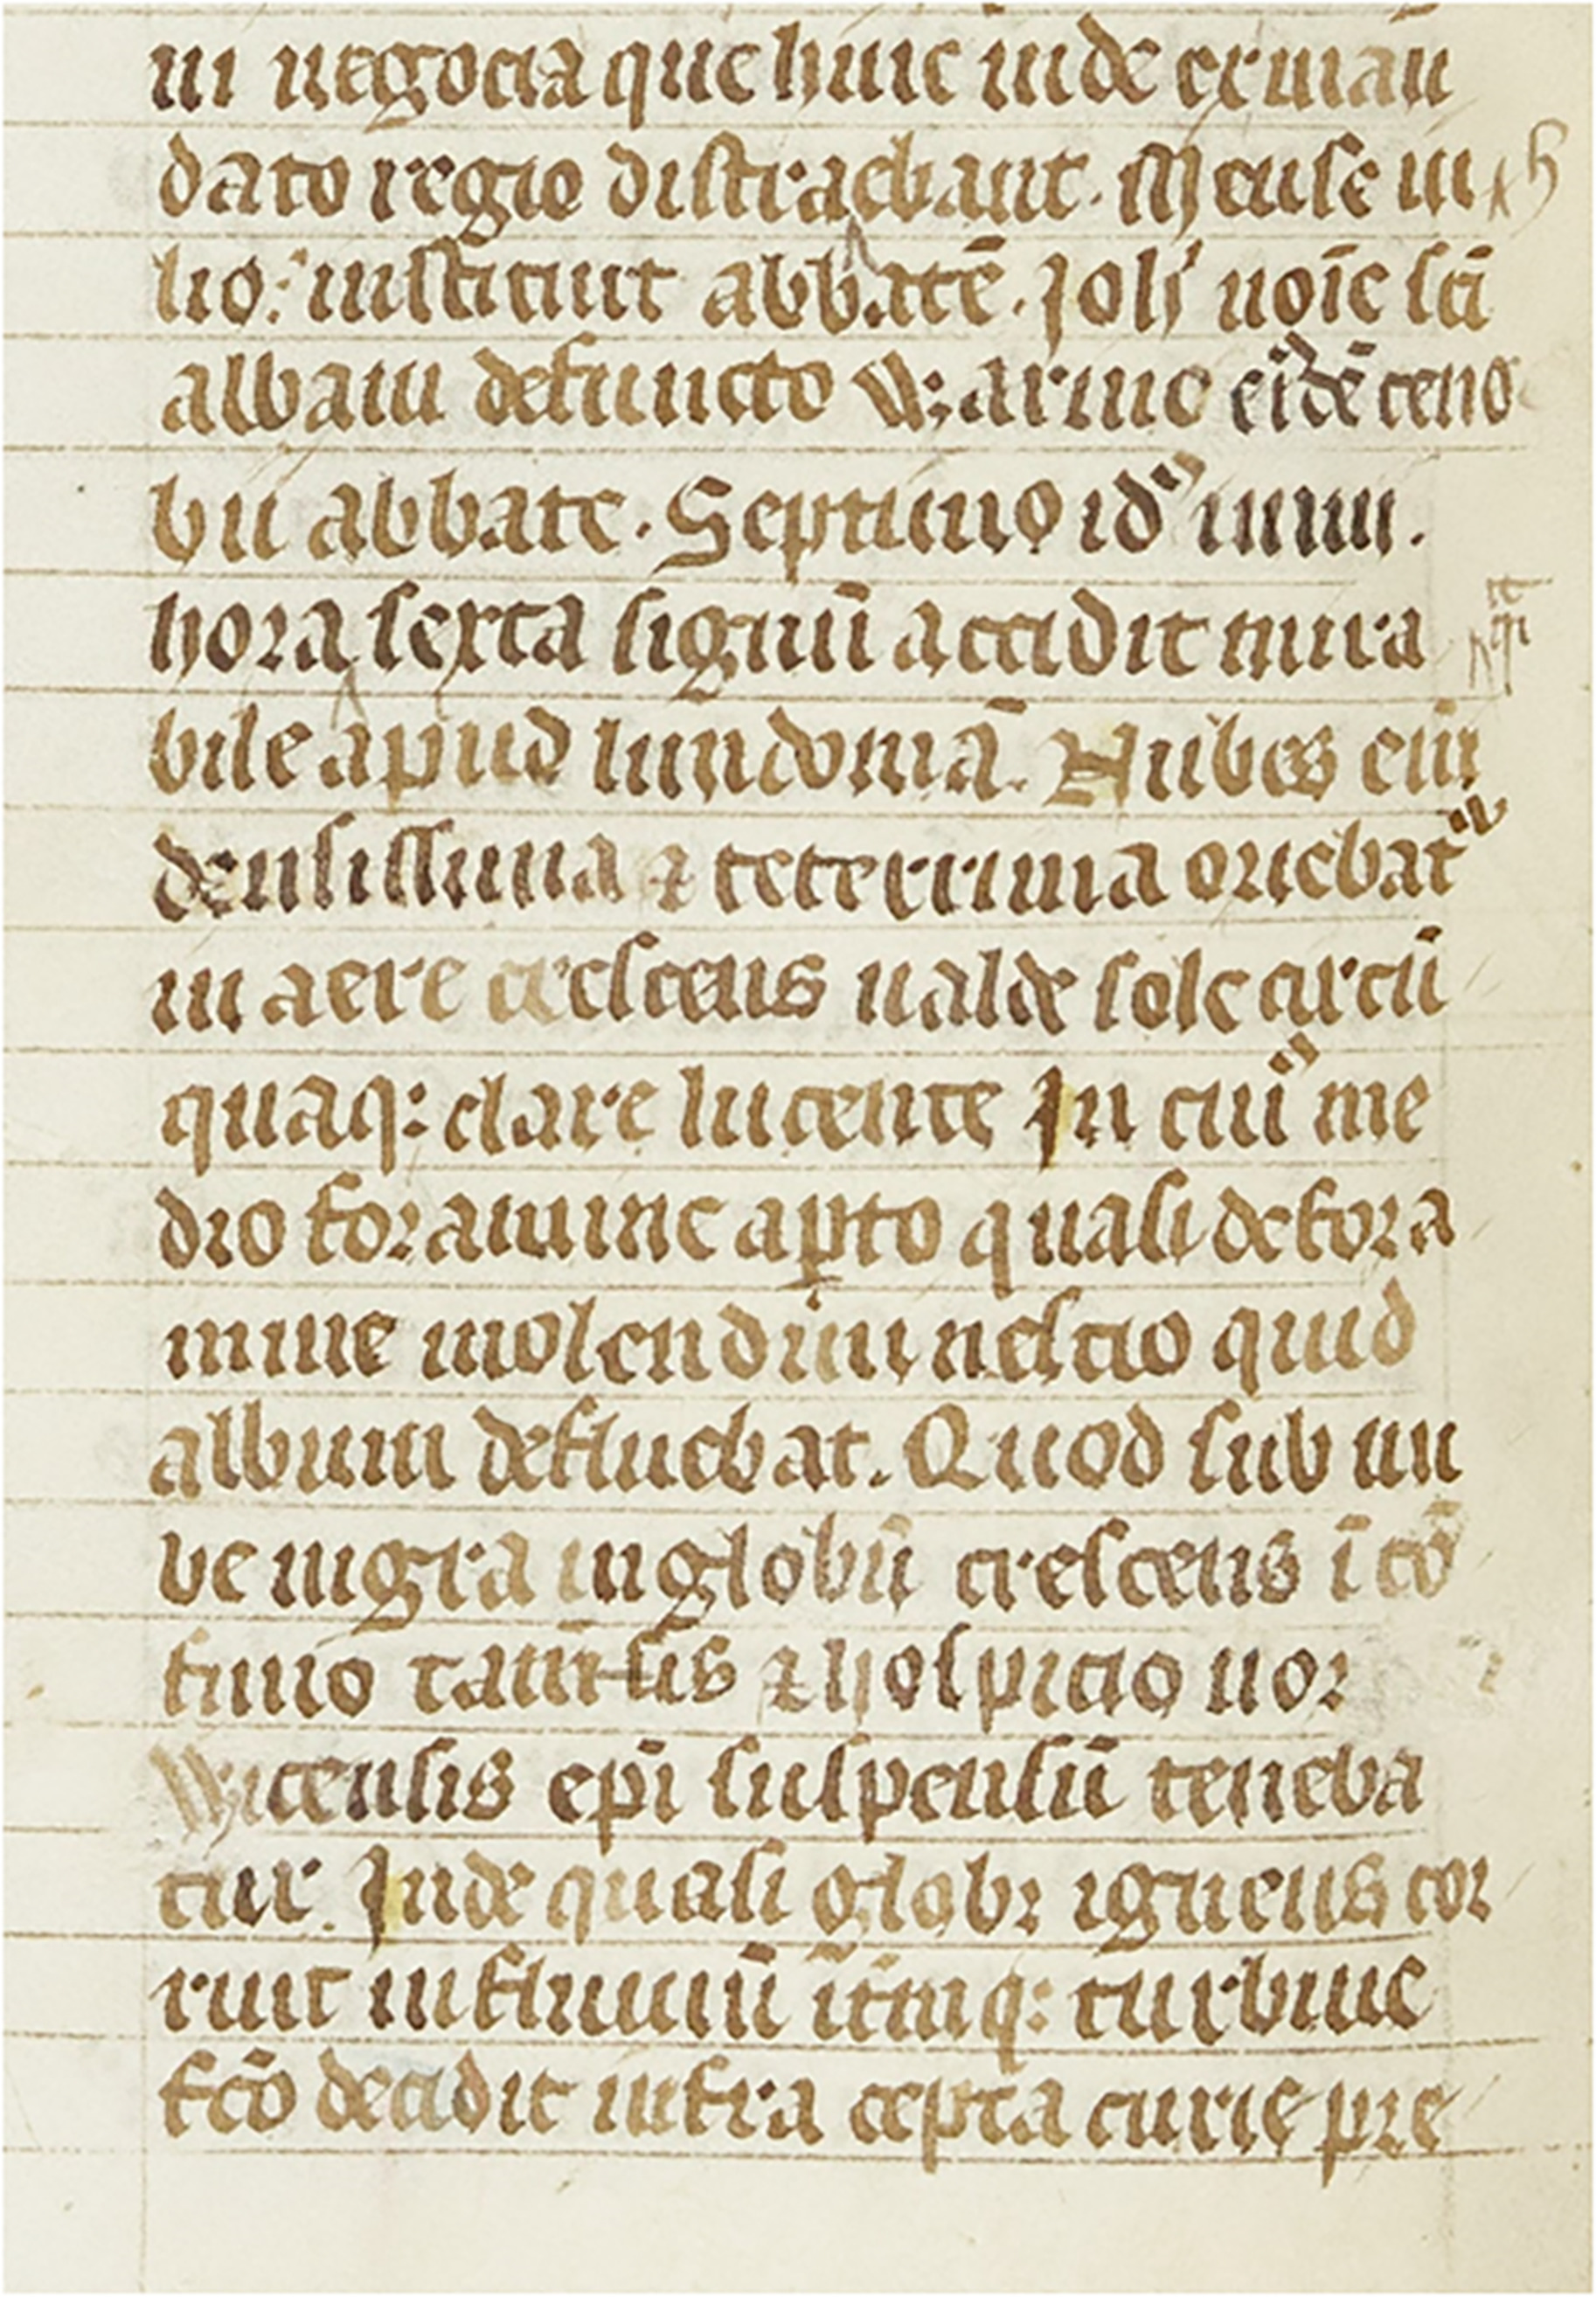 The medieval text